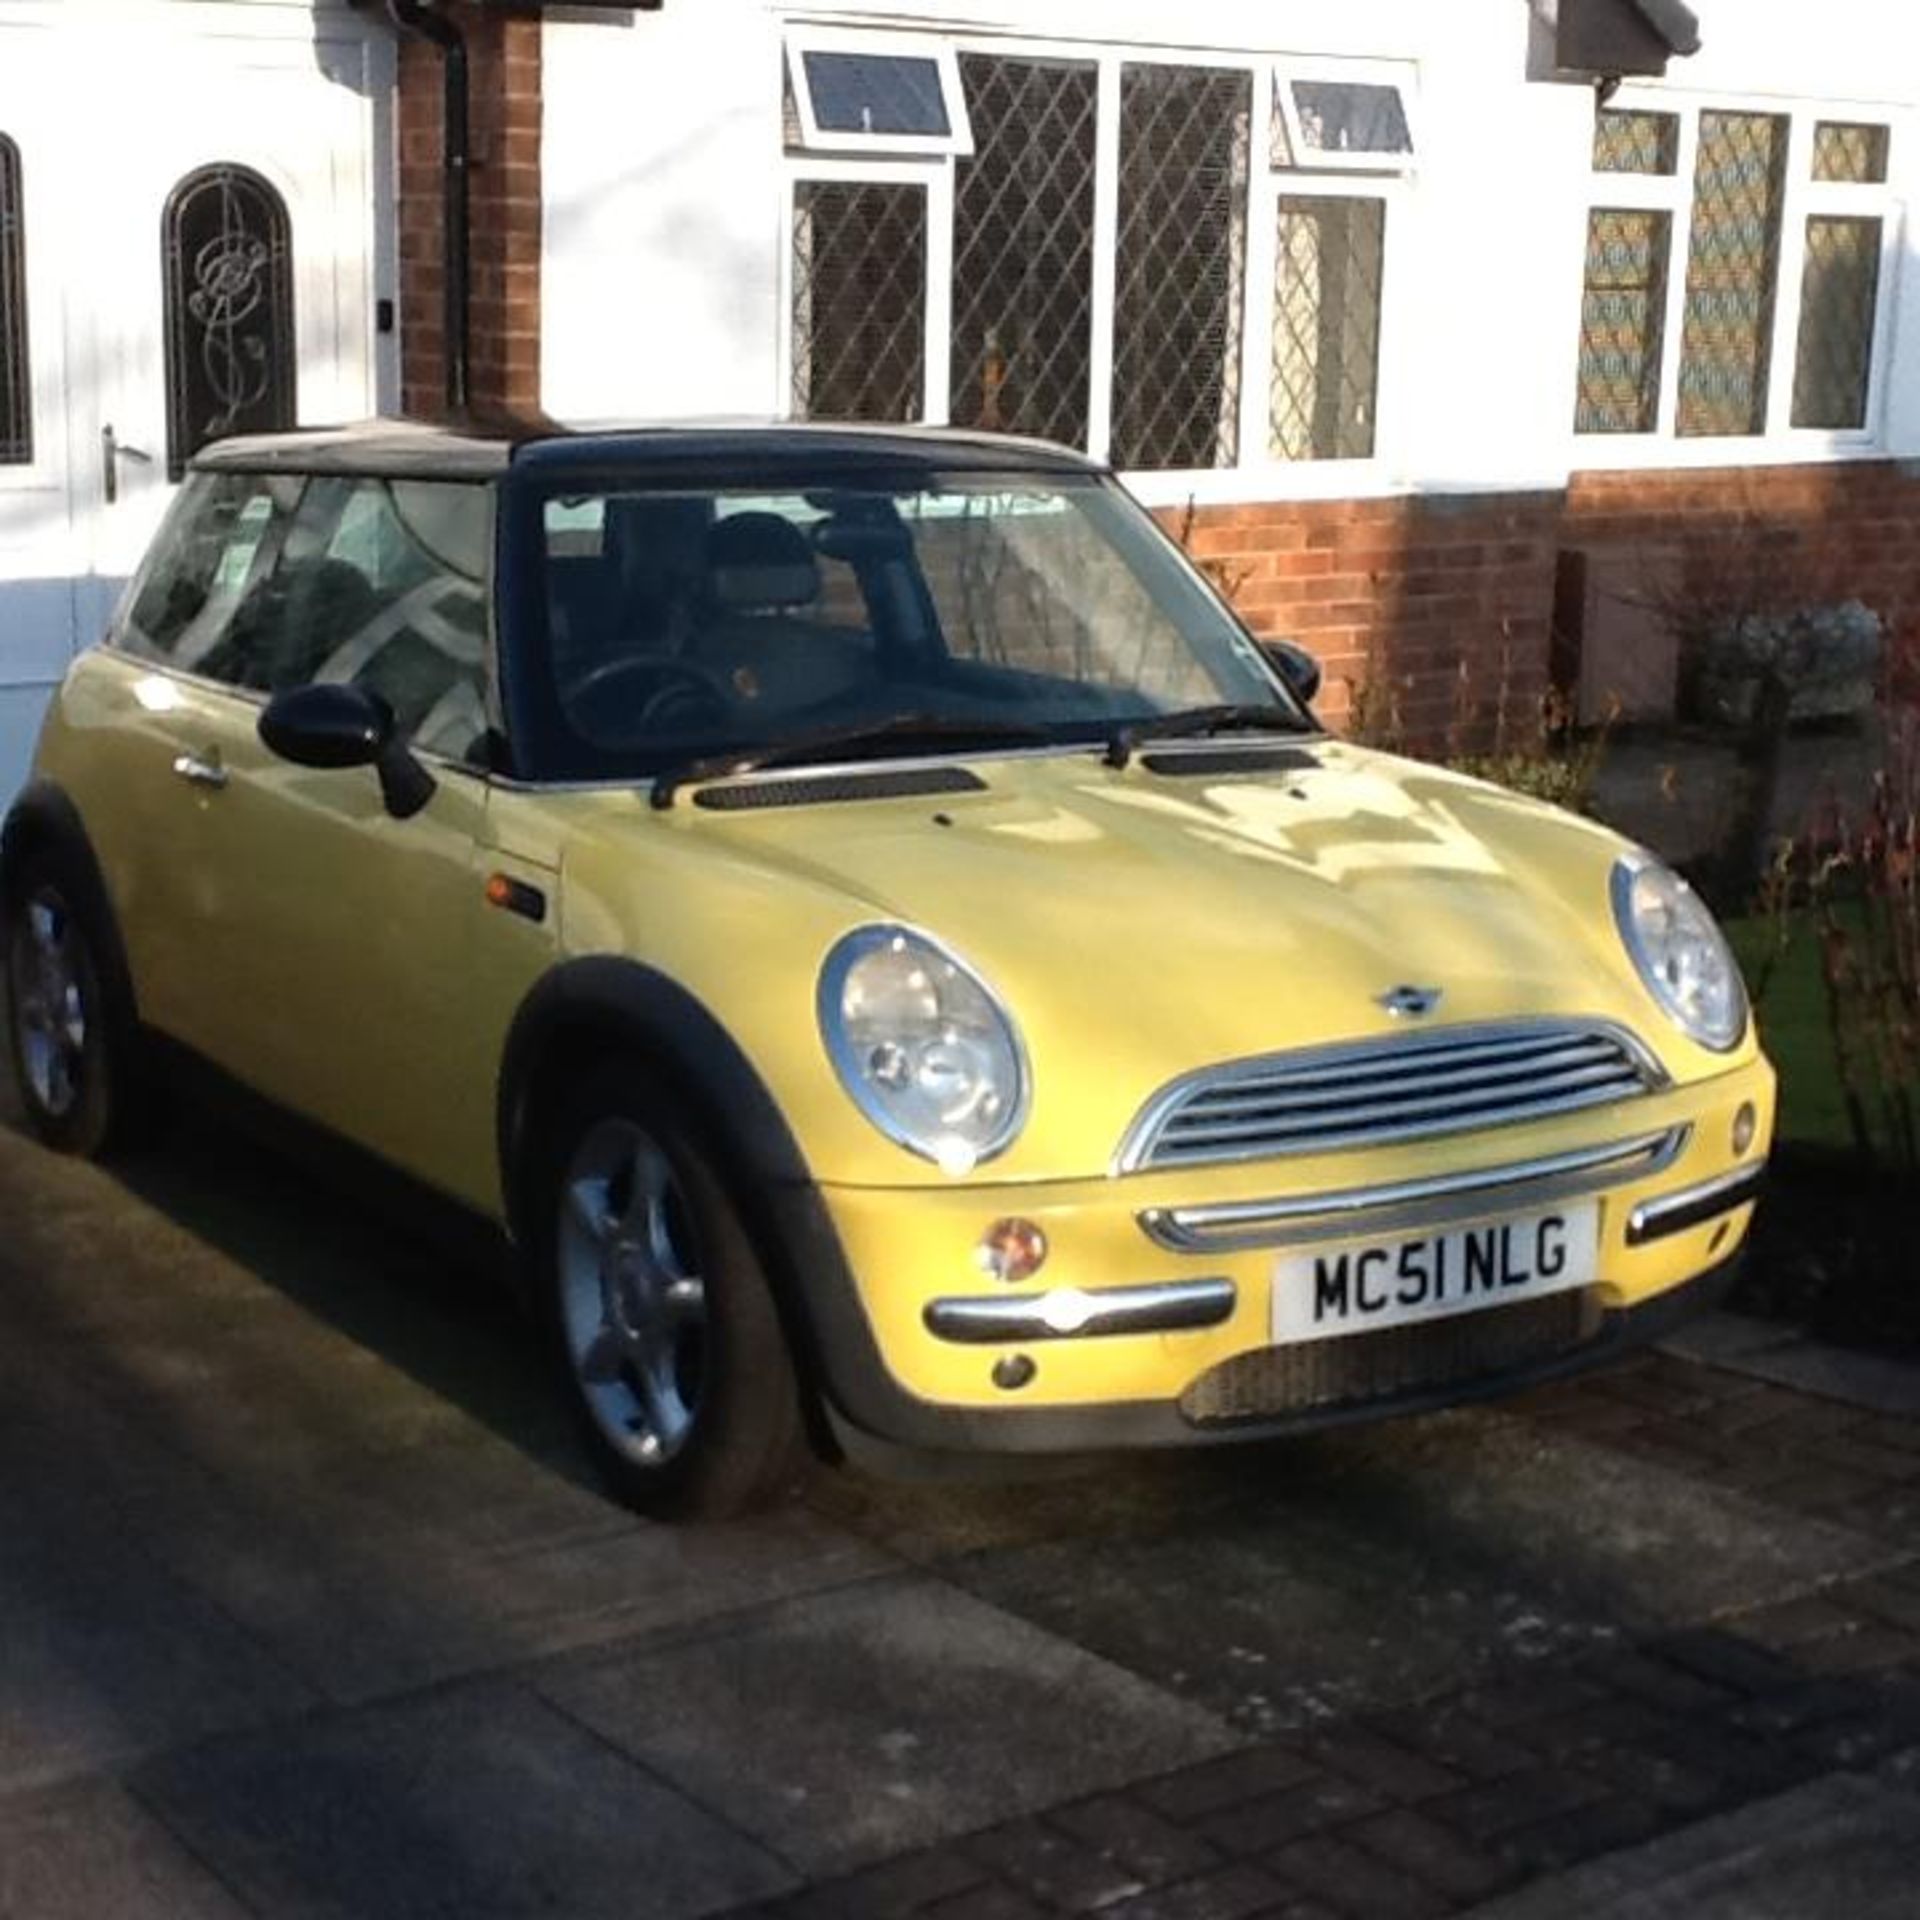 A 2001 (51) MINI COOPER, 1600 CC. MOT TO 25.2.21. RECENT INVOICES FOR £700 INCLUDING 4 NEW TYRES.